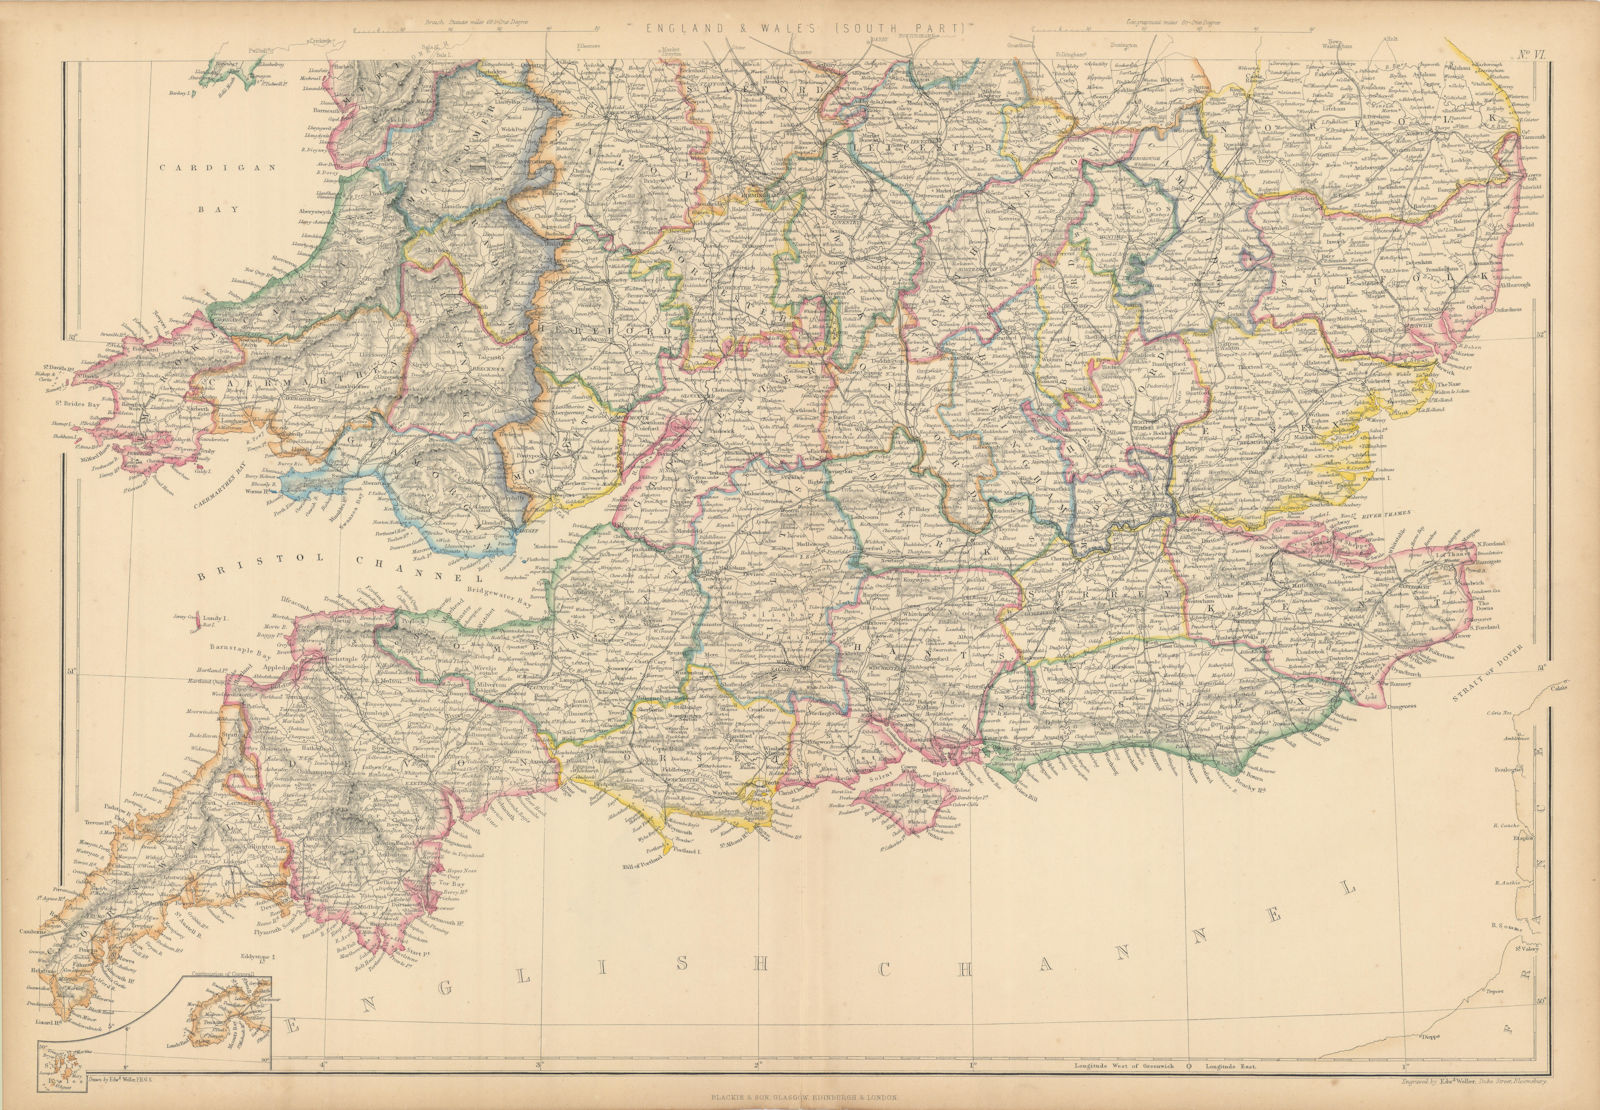 Associate Product England and Wales (South Part) by Edward Weller 1859 old antique map chart